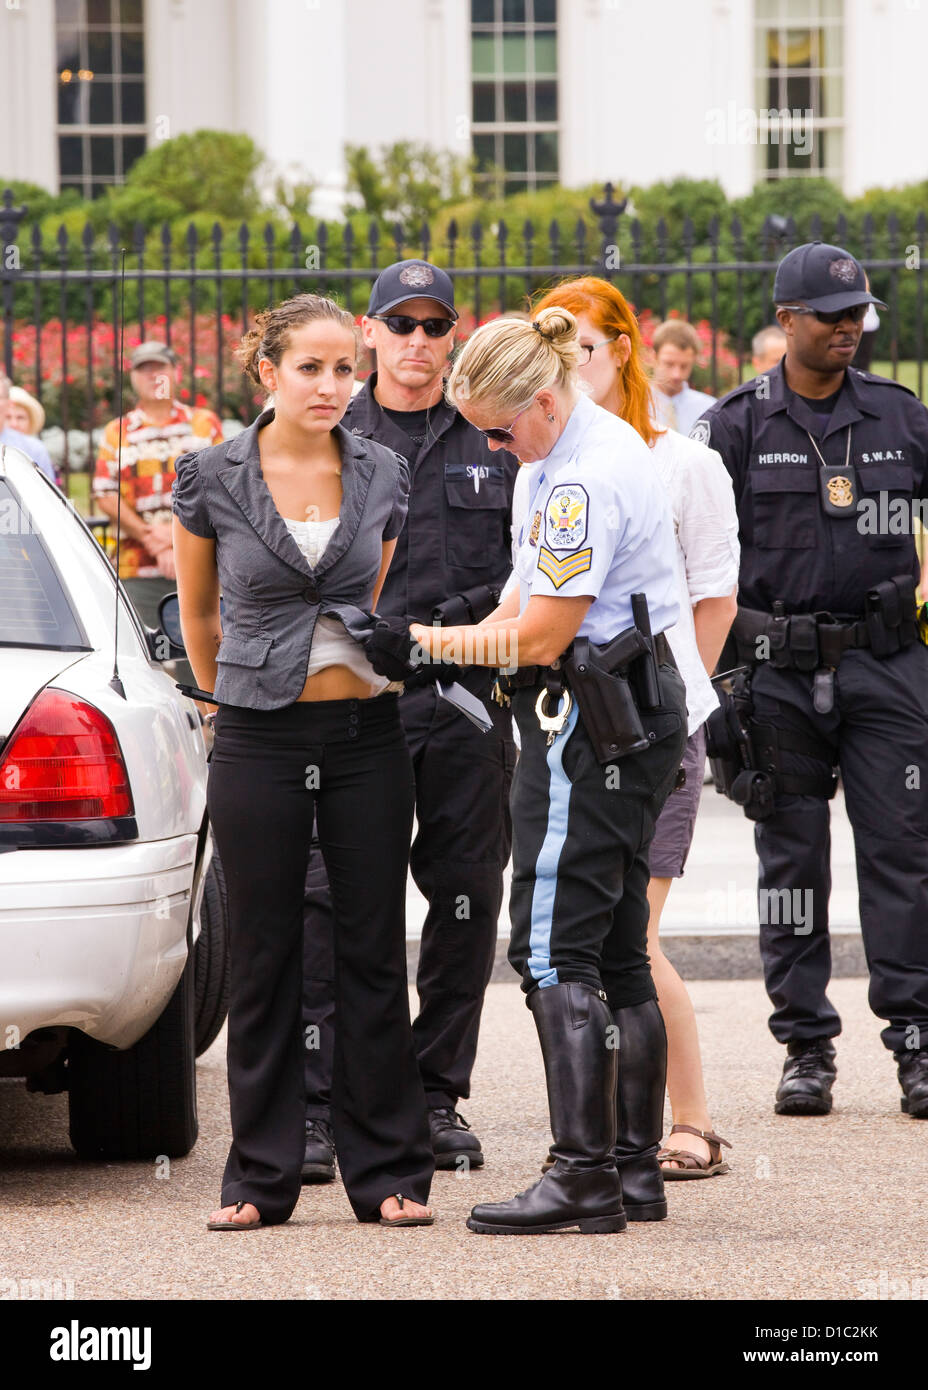 Woman under arrest and being searched by police at a public protest - Washington, DC USA Stock Photo